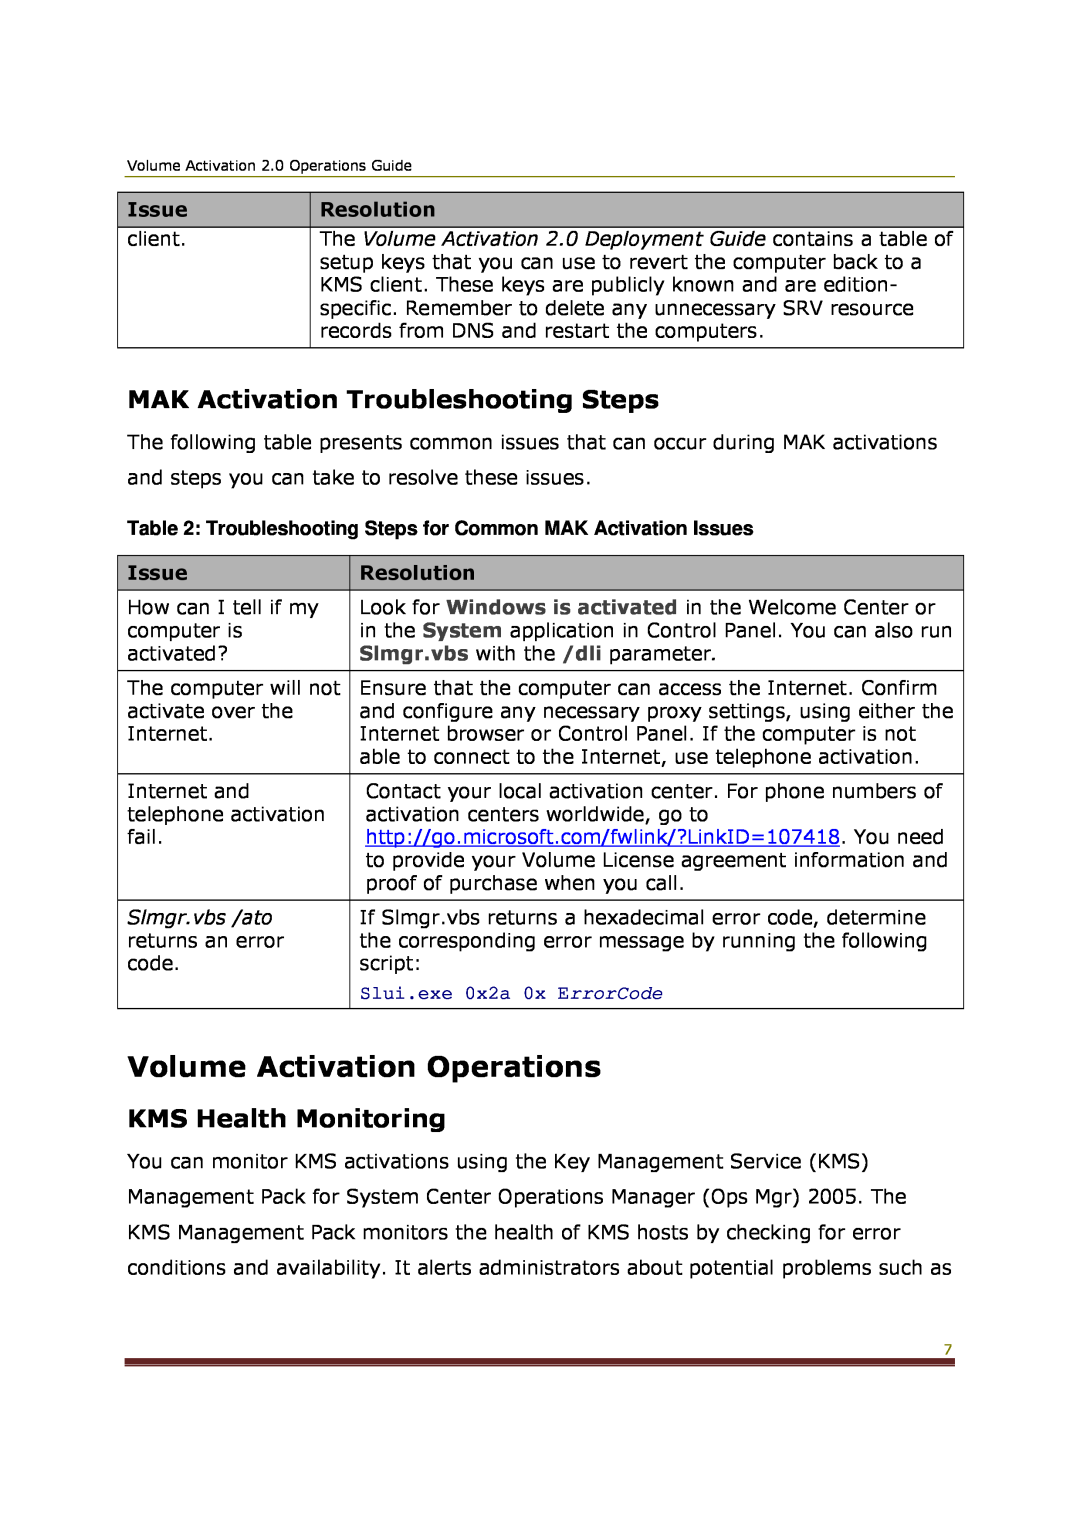 Microsoft 2 manual Volume Activation Operations, MAK Activation Troubleshooting Steps, KMS Health Monitoring 